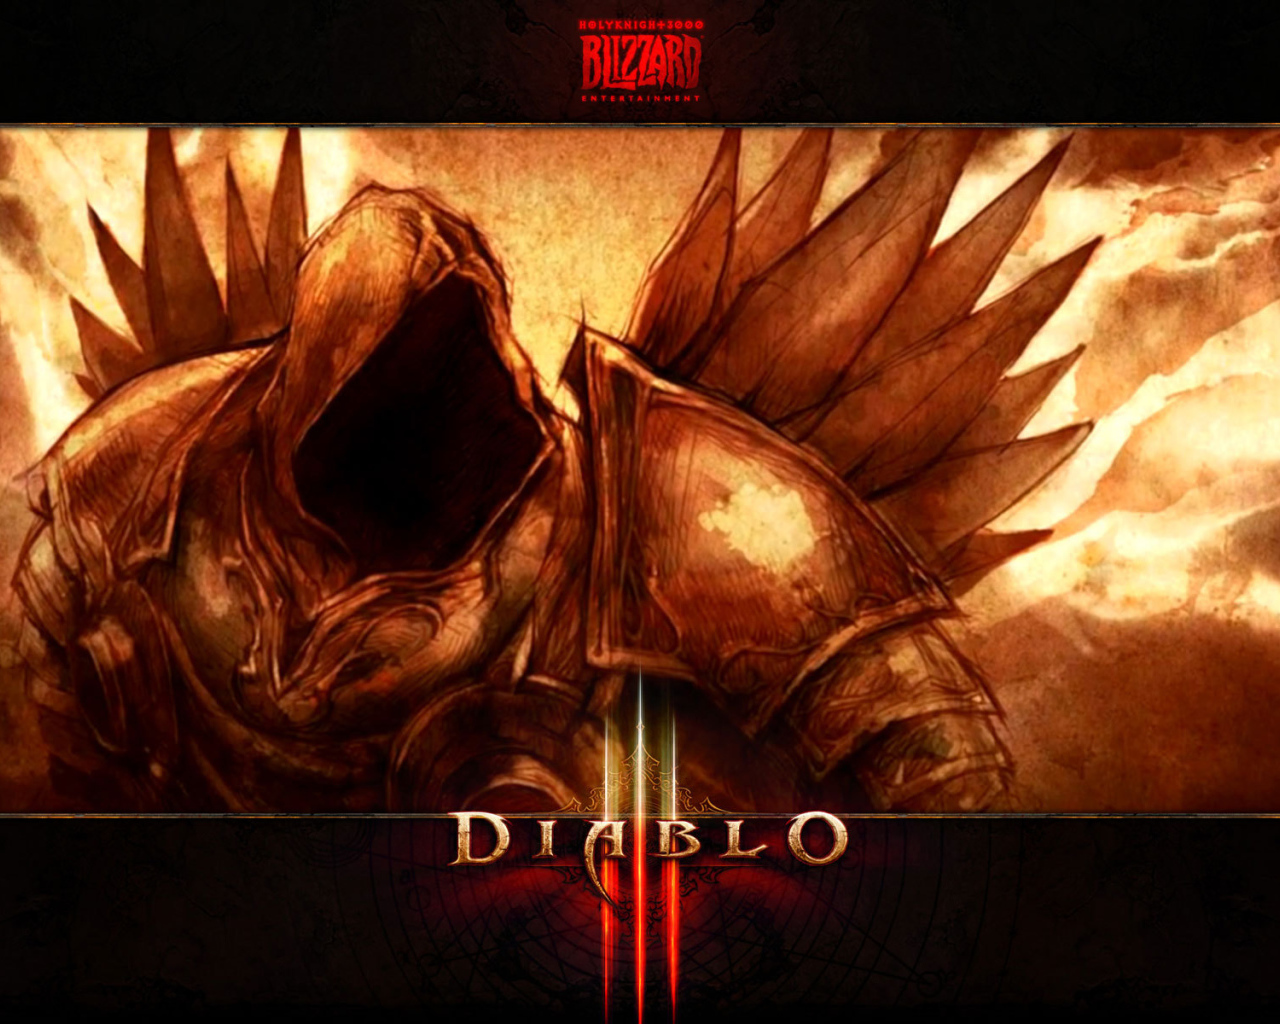 Diablo III: the anger of the angel is unforgettable